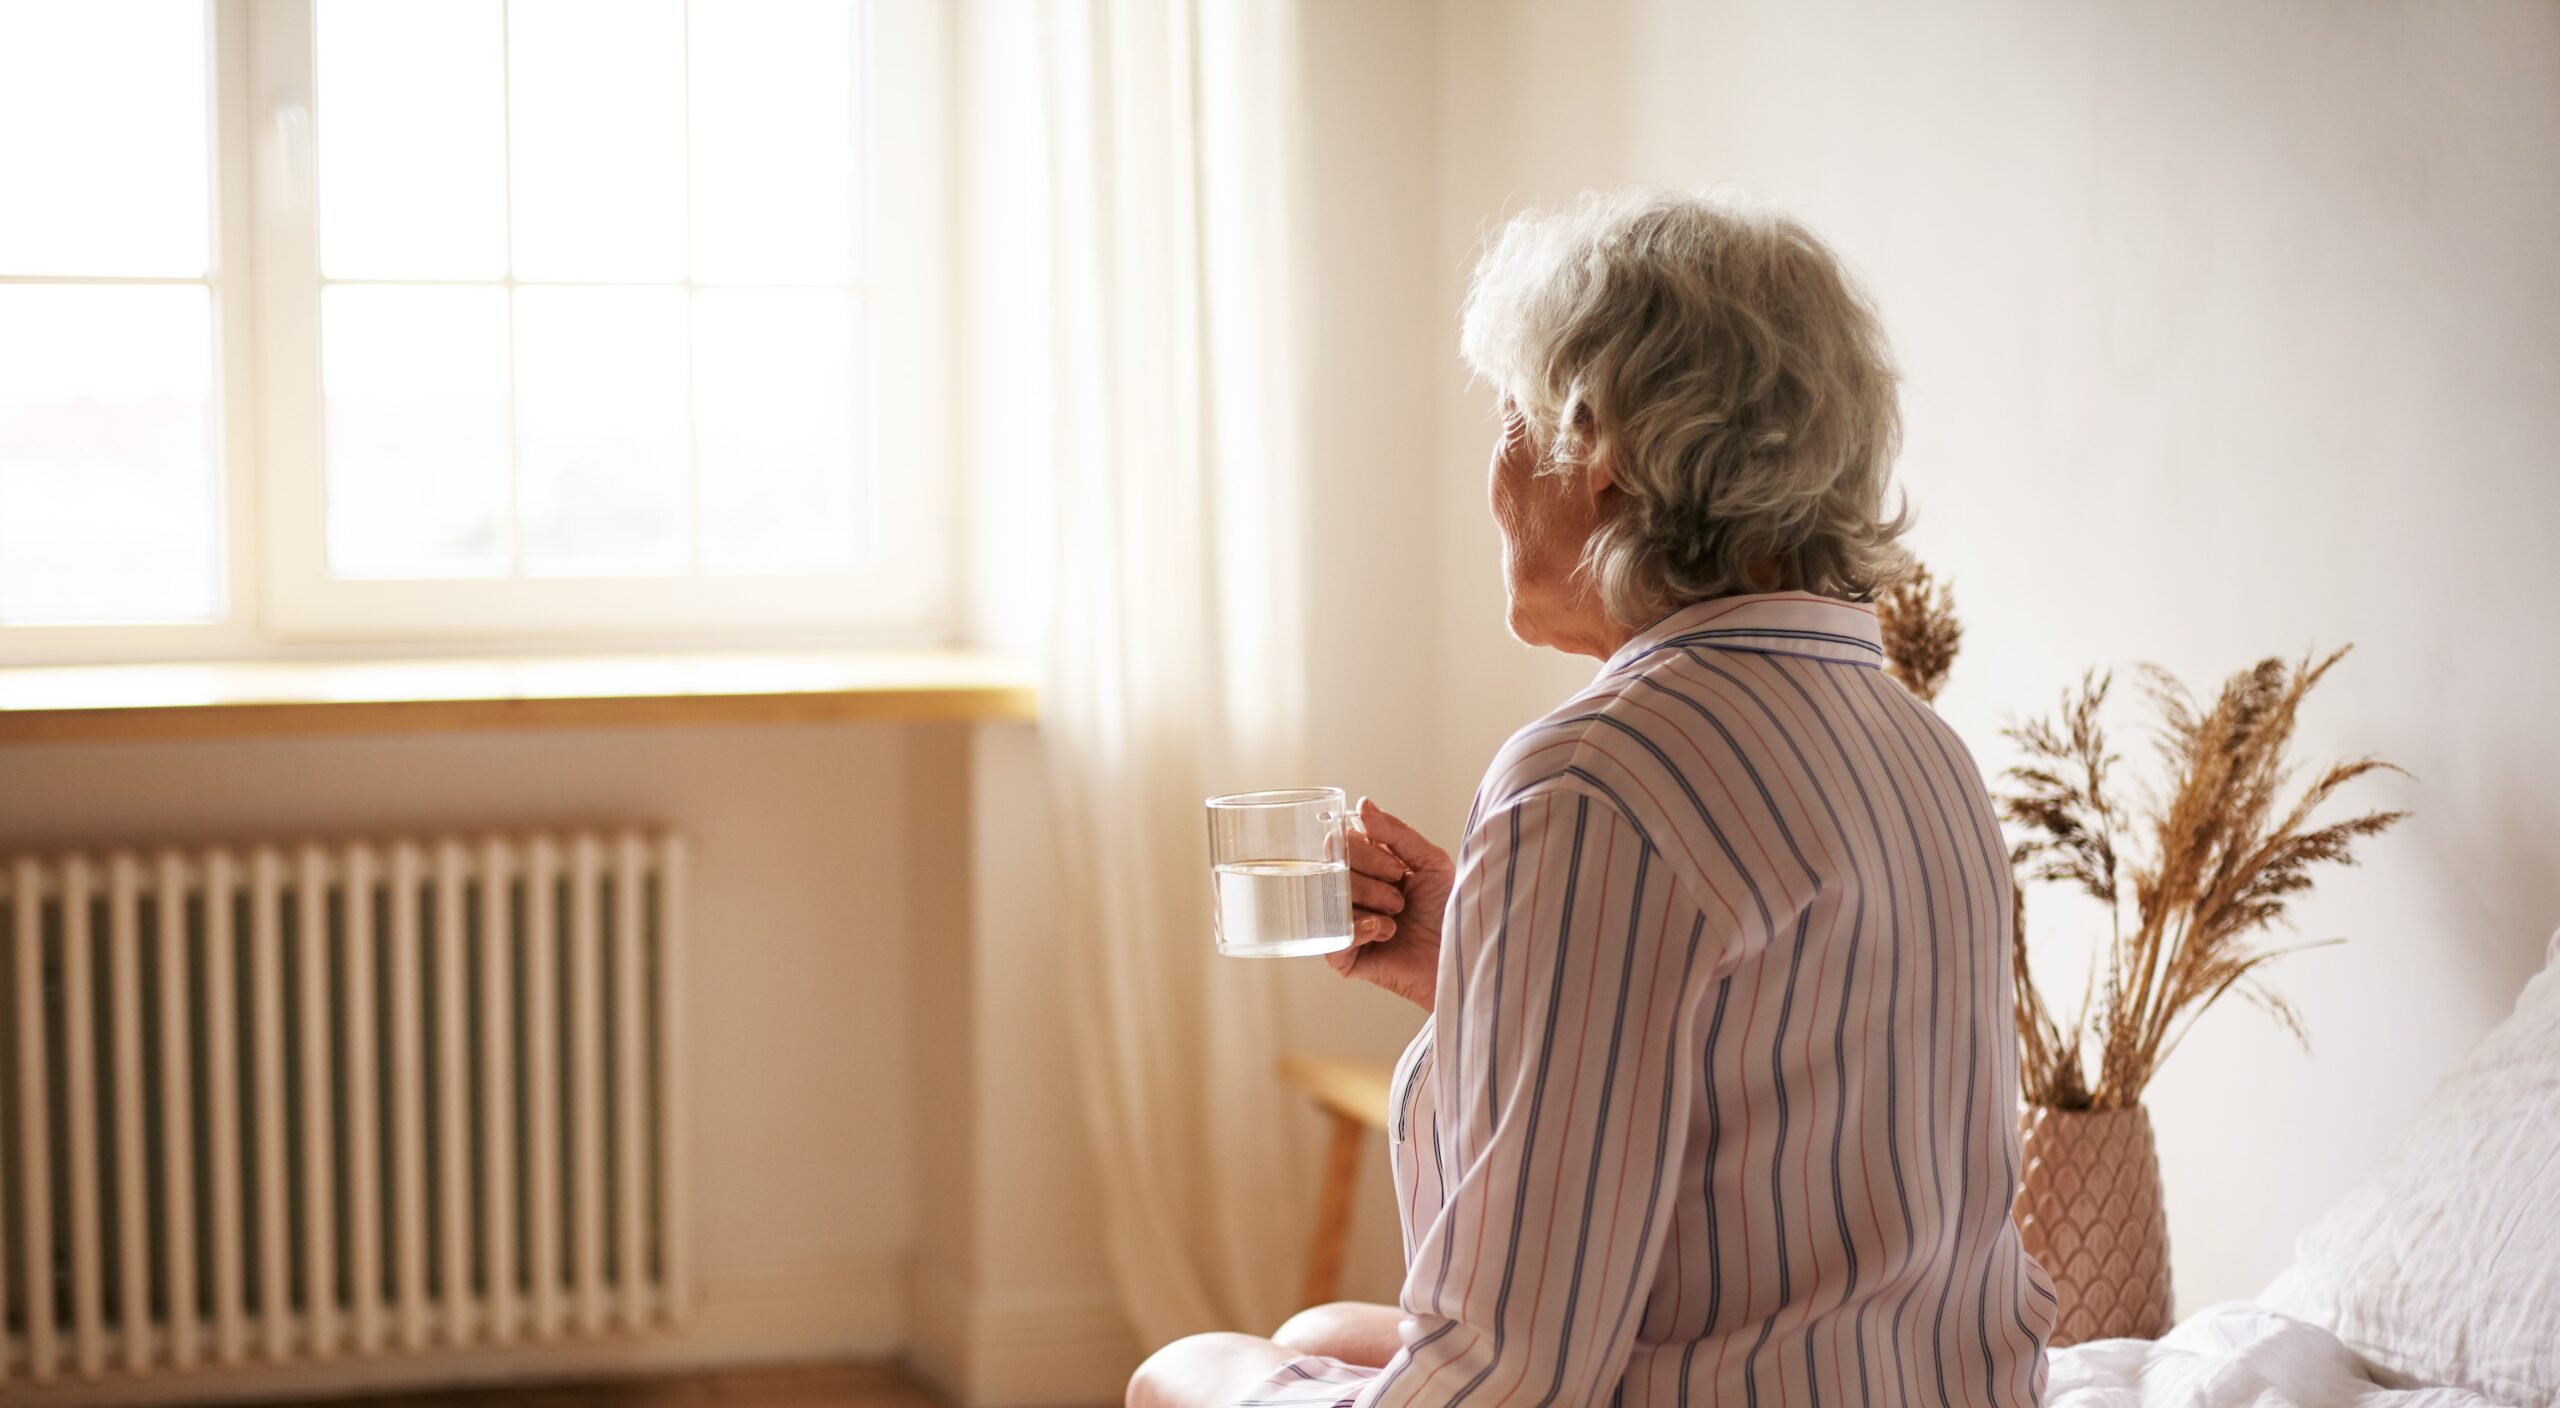 Rear view of senior sixty year old woman with gray hair holding mug washing down sleeping pill, suffering from insomnia. Elderly retired female taking medicine with water, sitting in bedroom